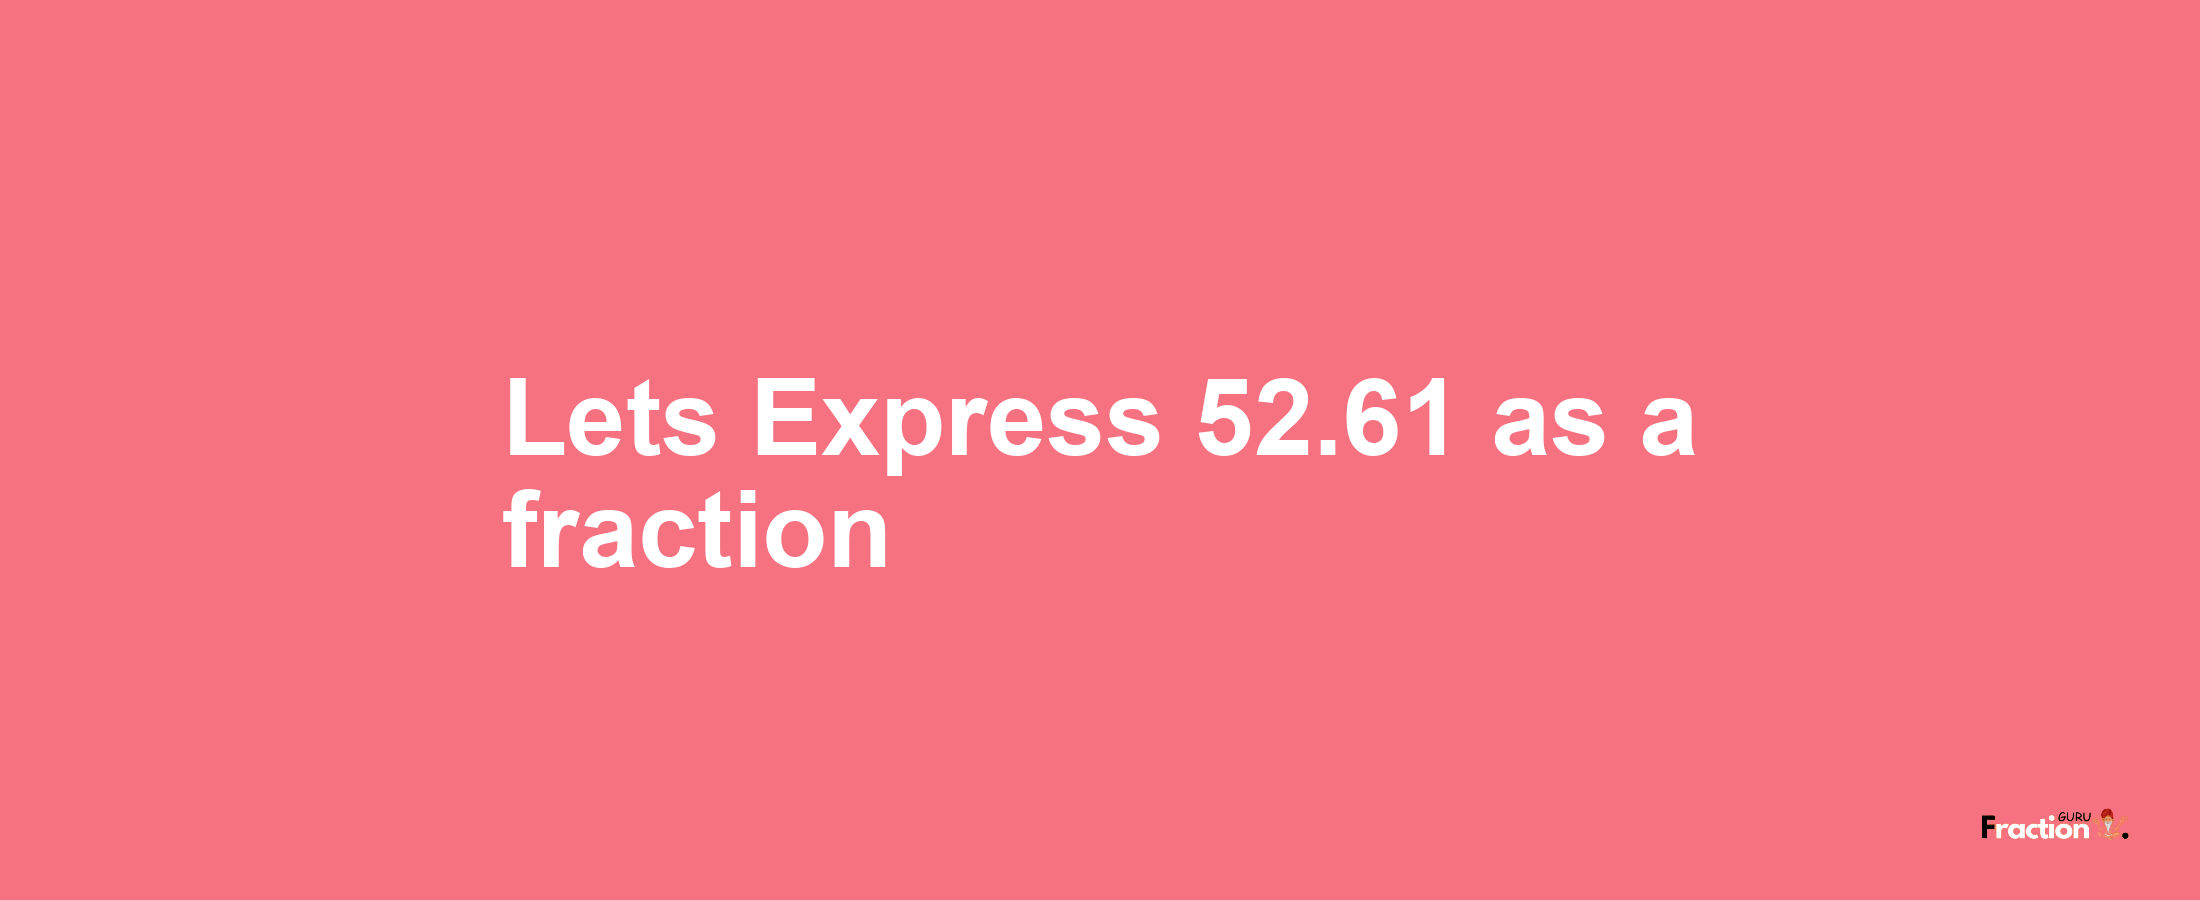 Lets Express 52.61 as afraction